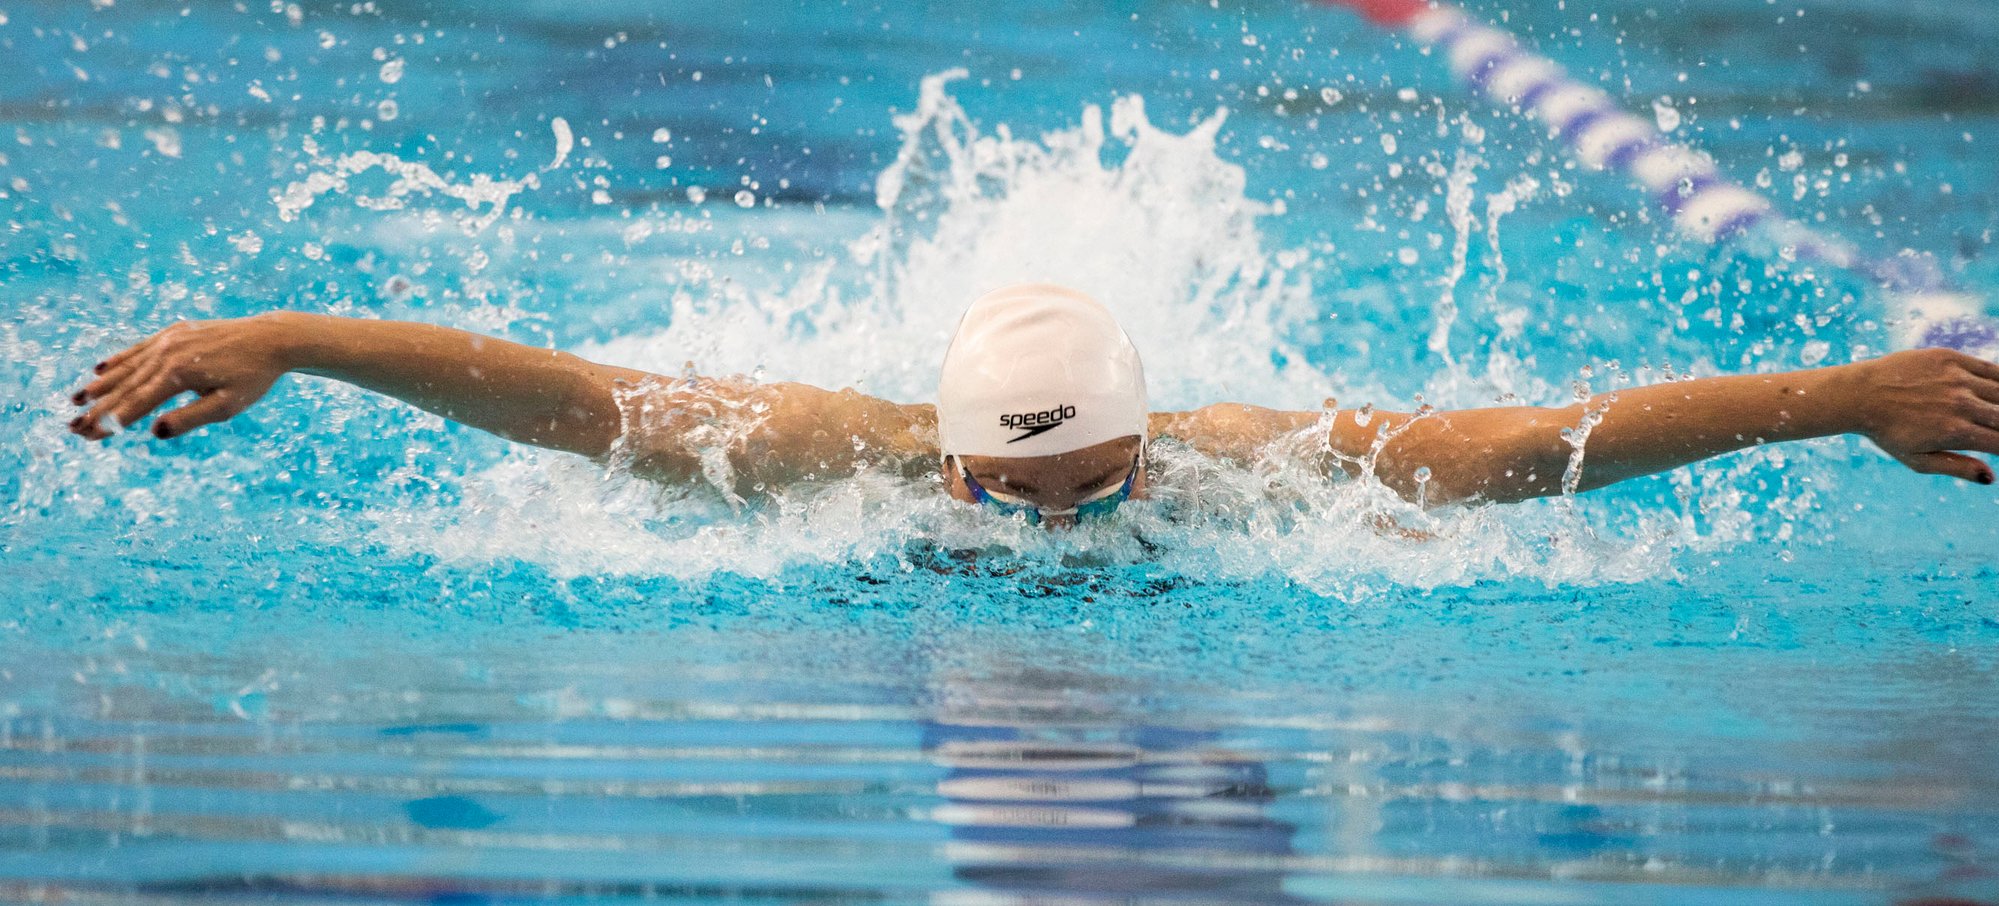 A swimmer, mid-stroke doing the butterfly with a white swimming cap